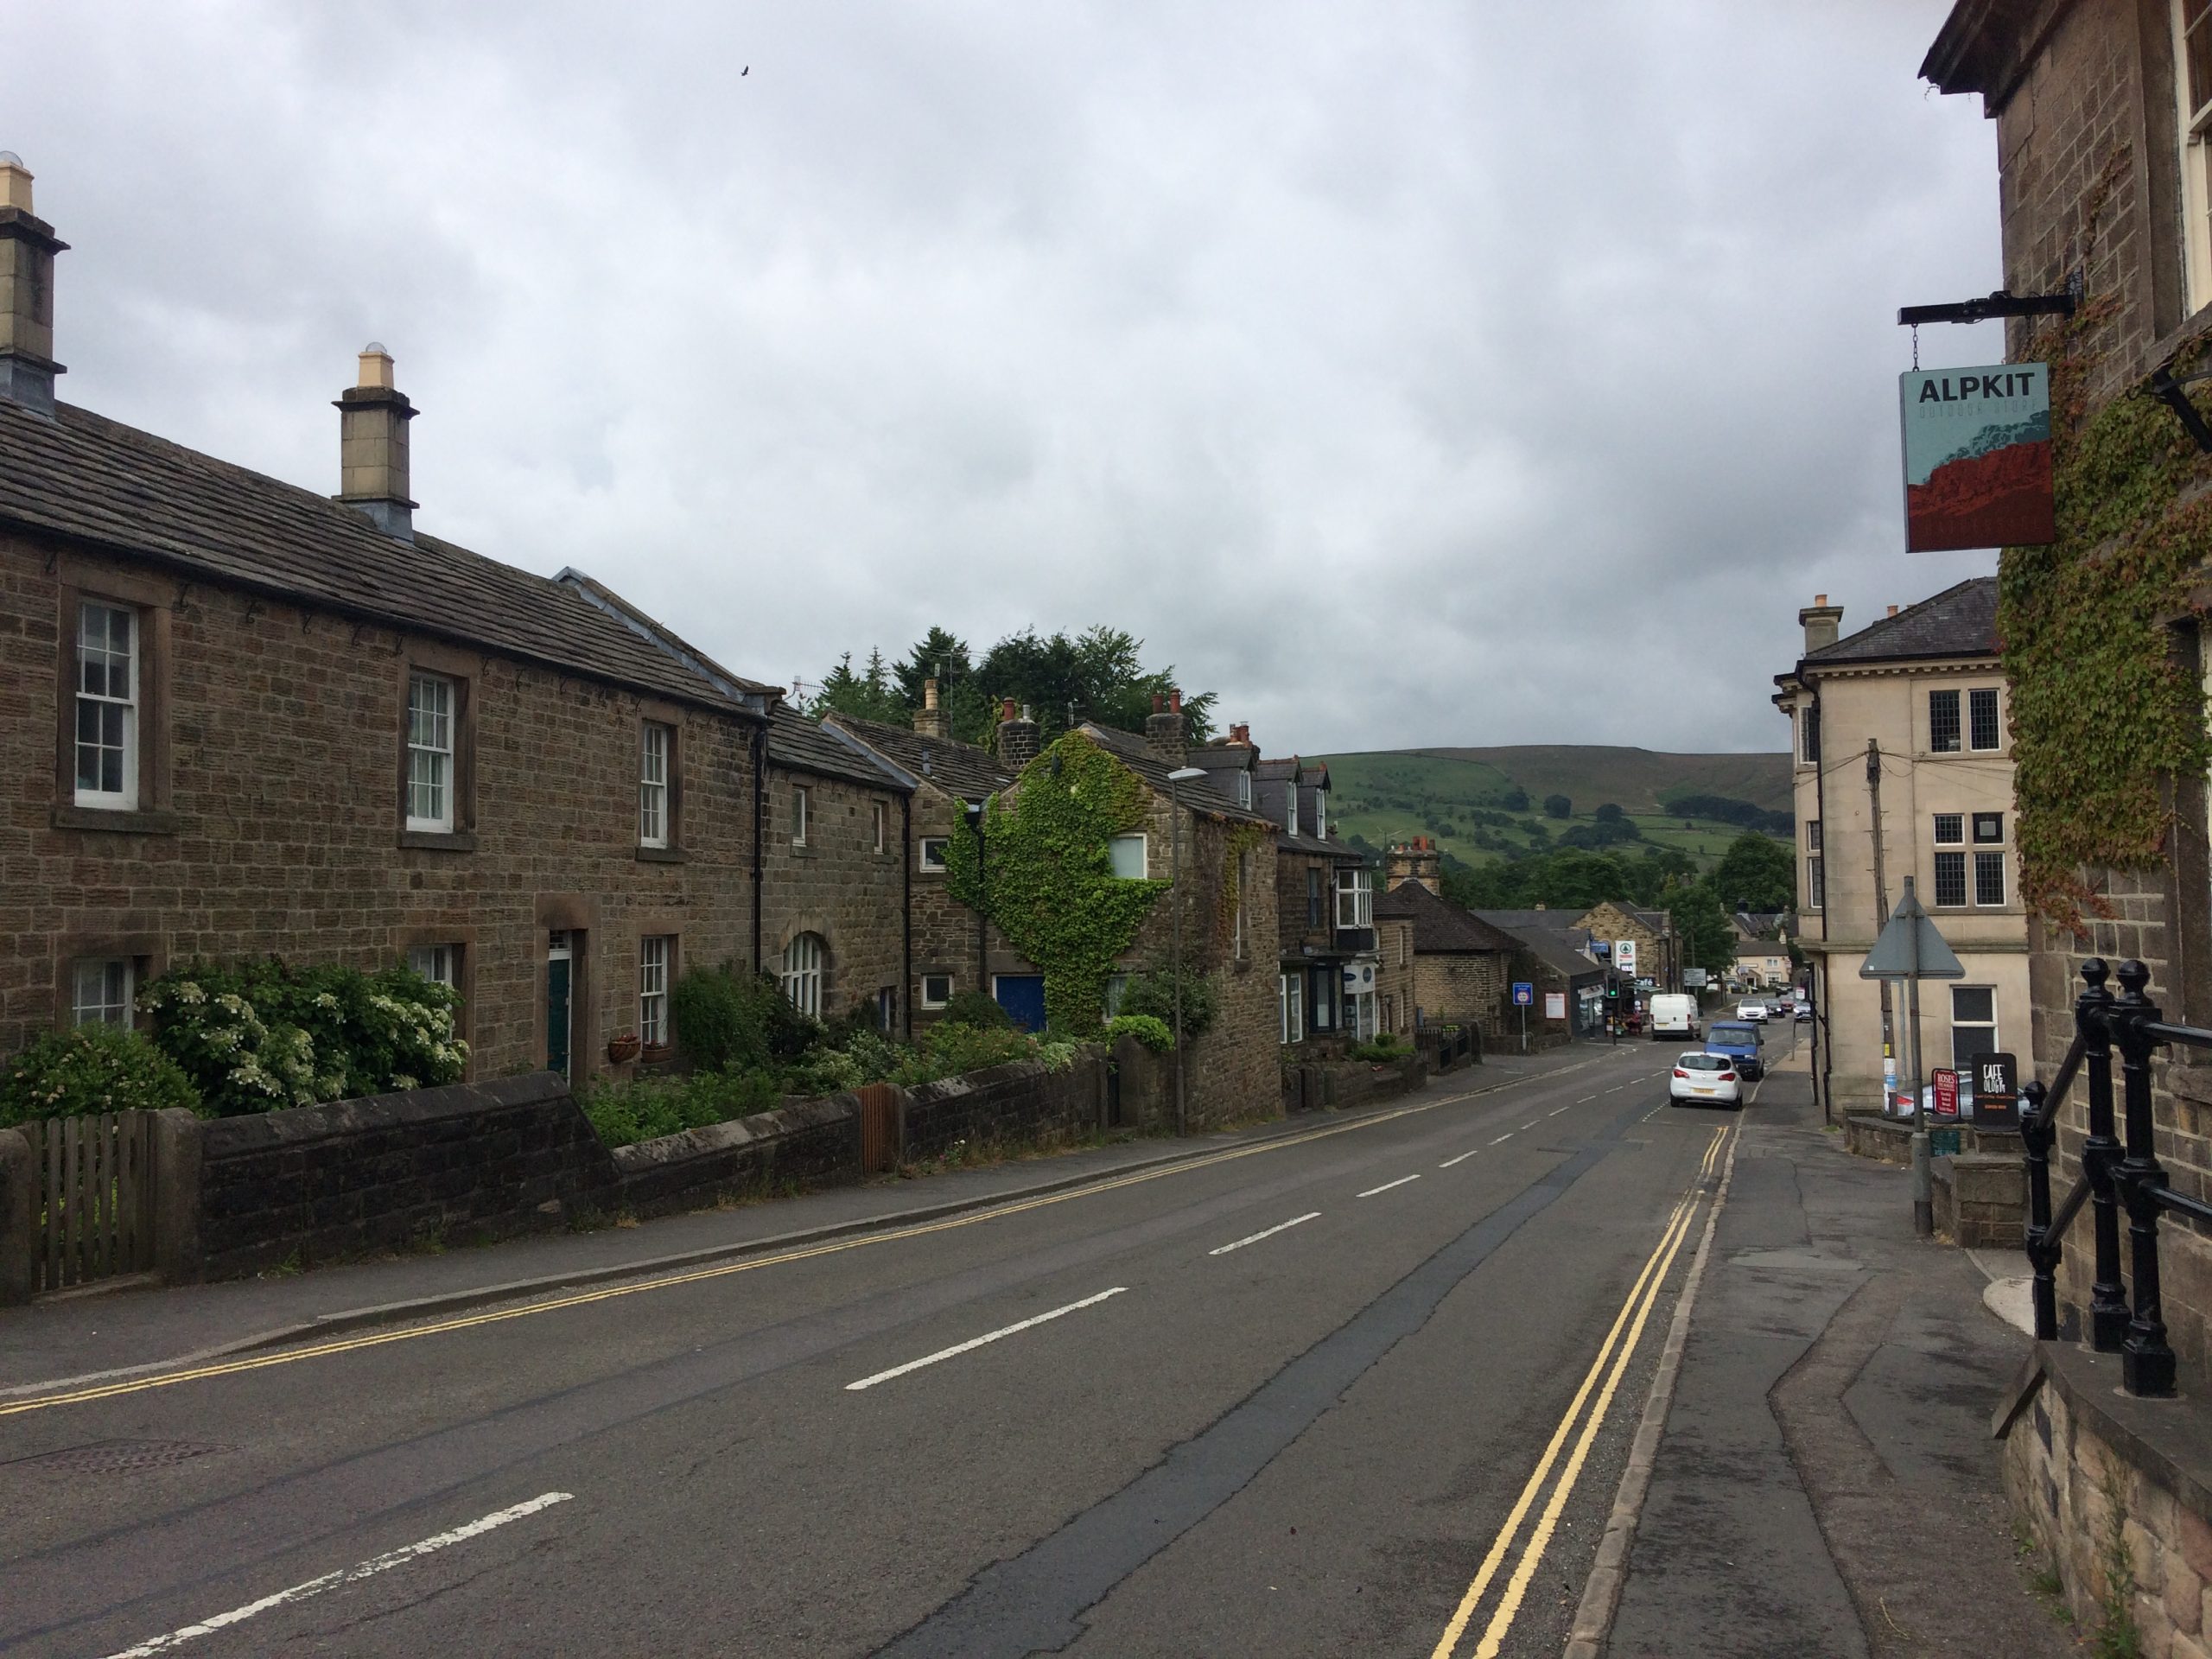 The main street in Hathersage